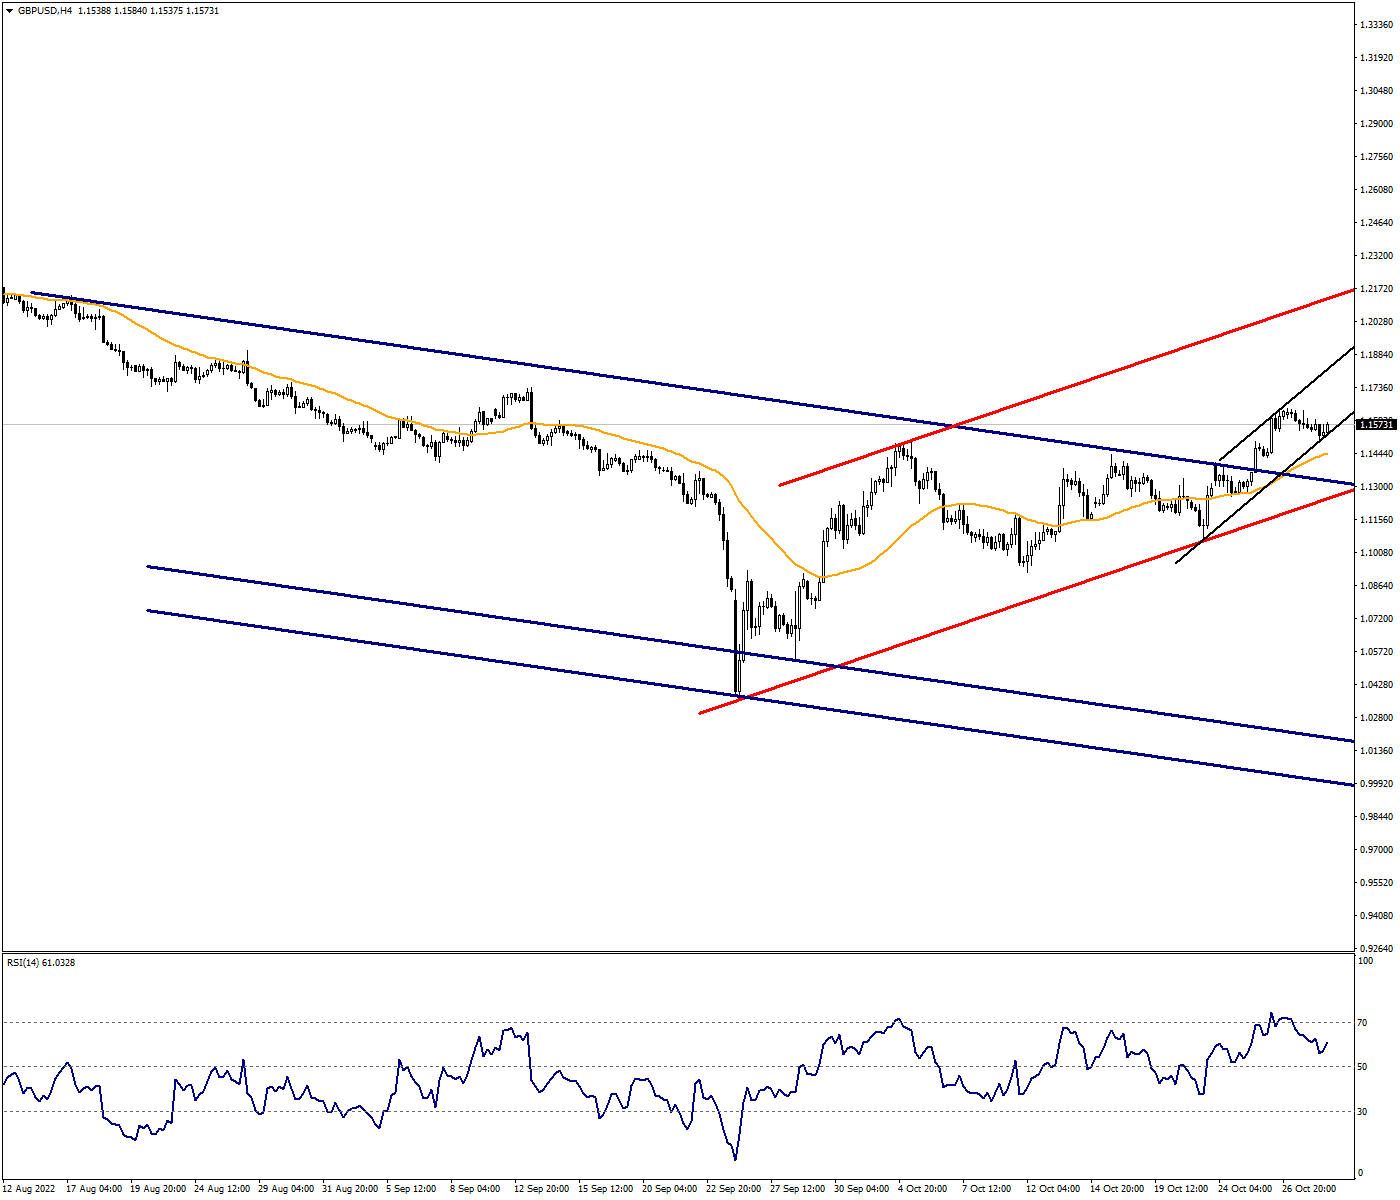 GBPUSD Can Be Priced Positively As Long As It Remains Above 1.1460